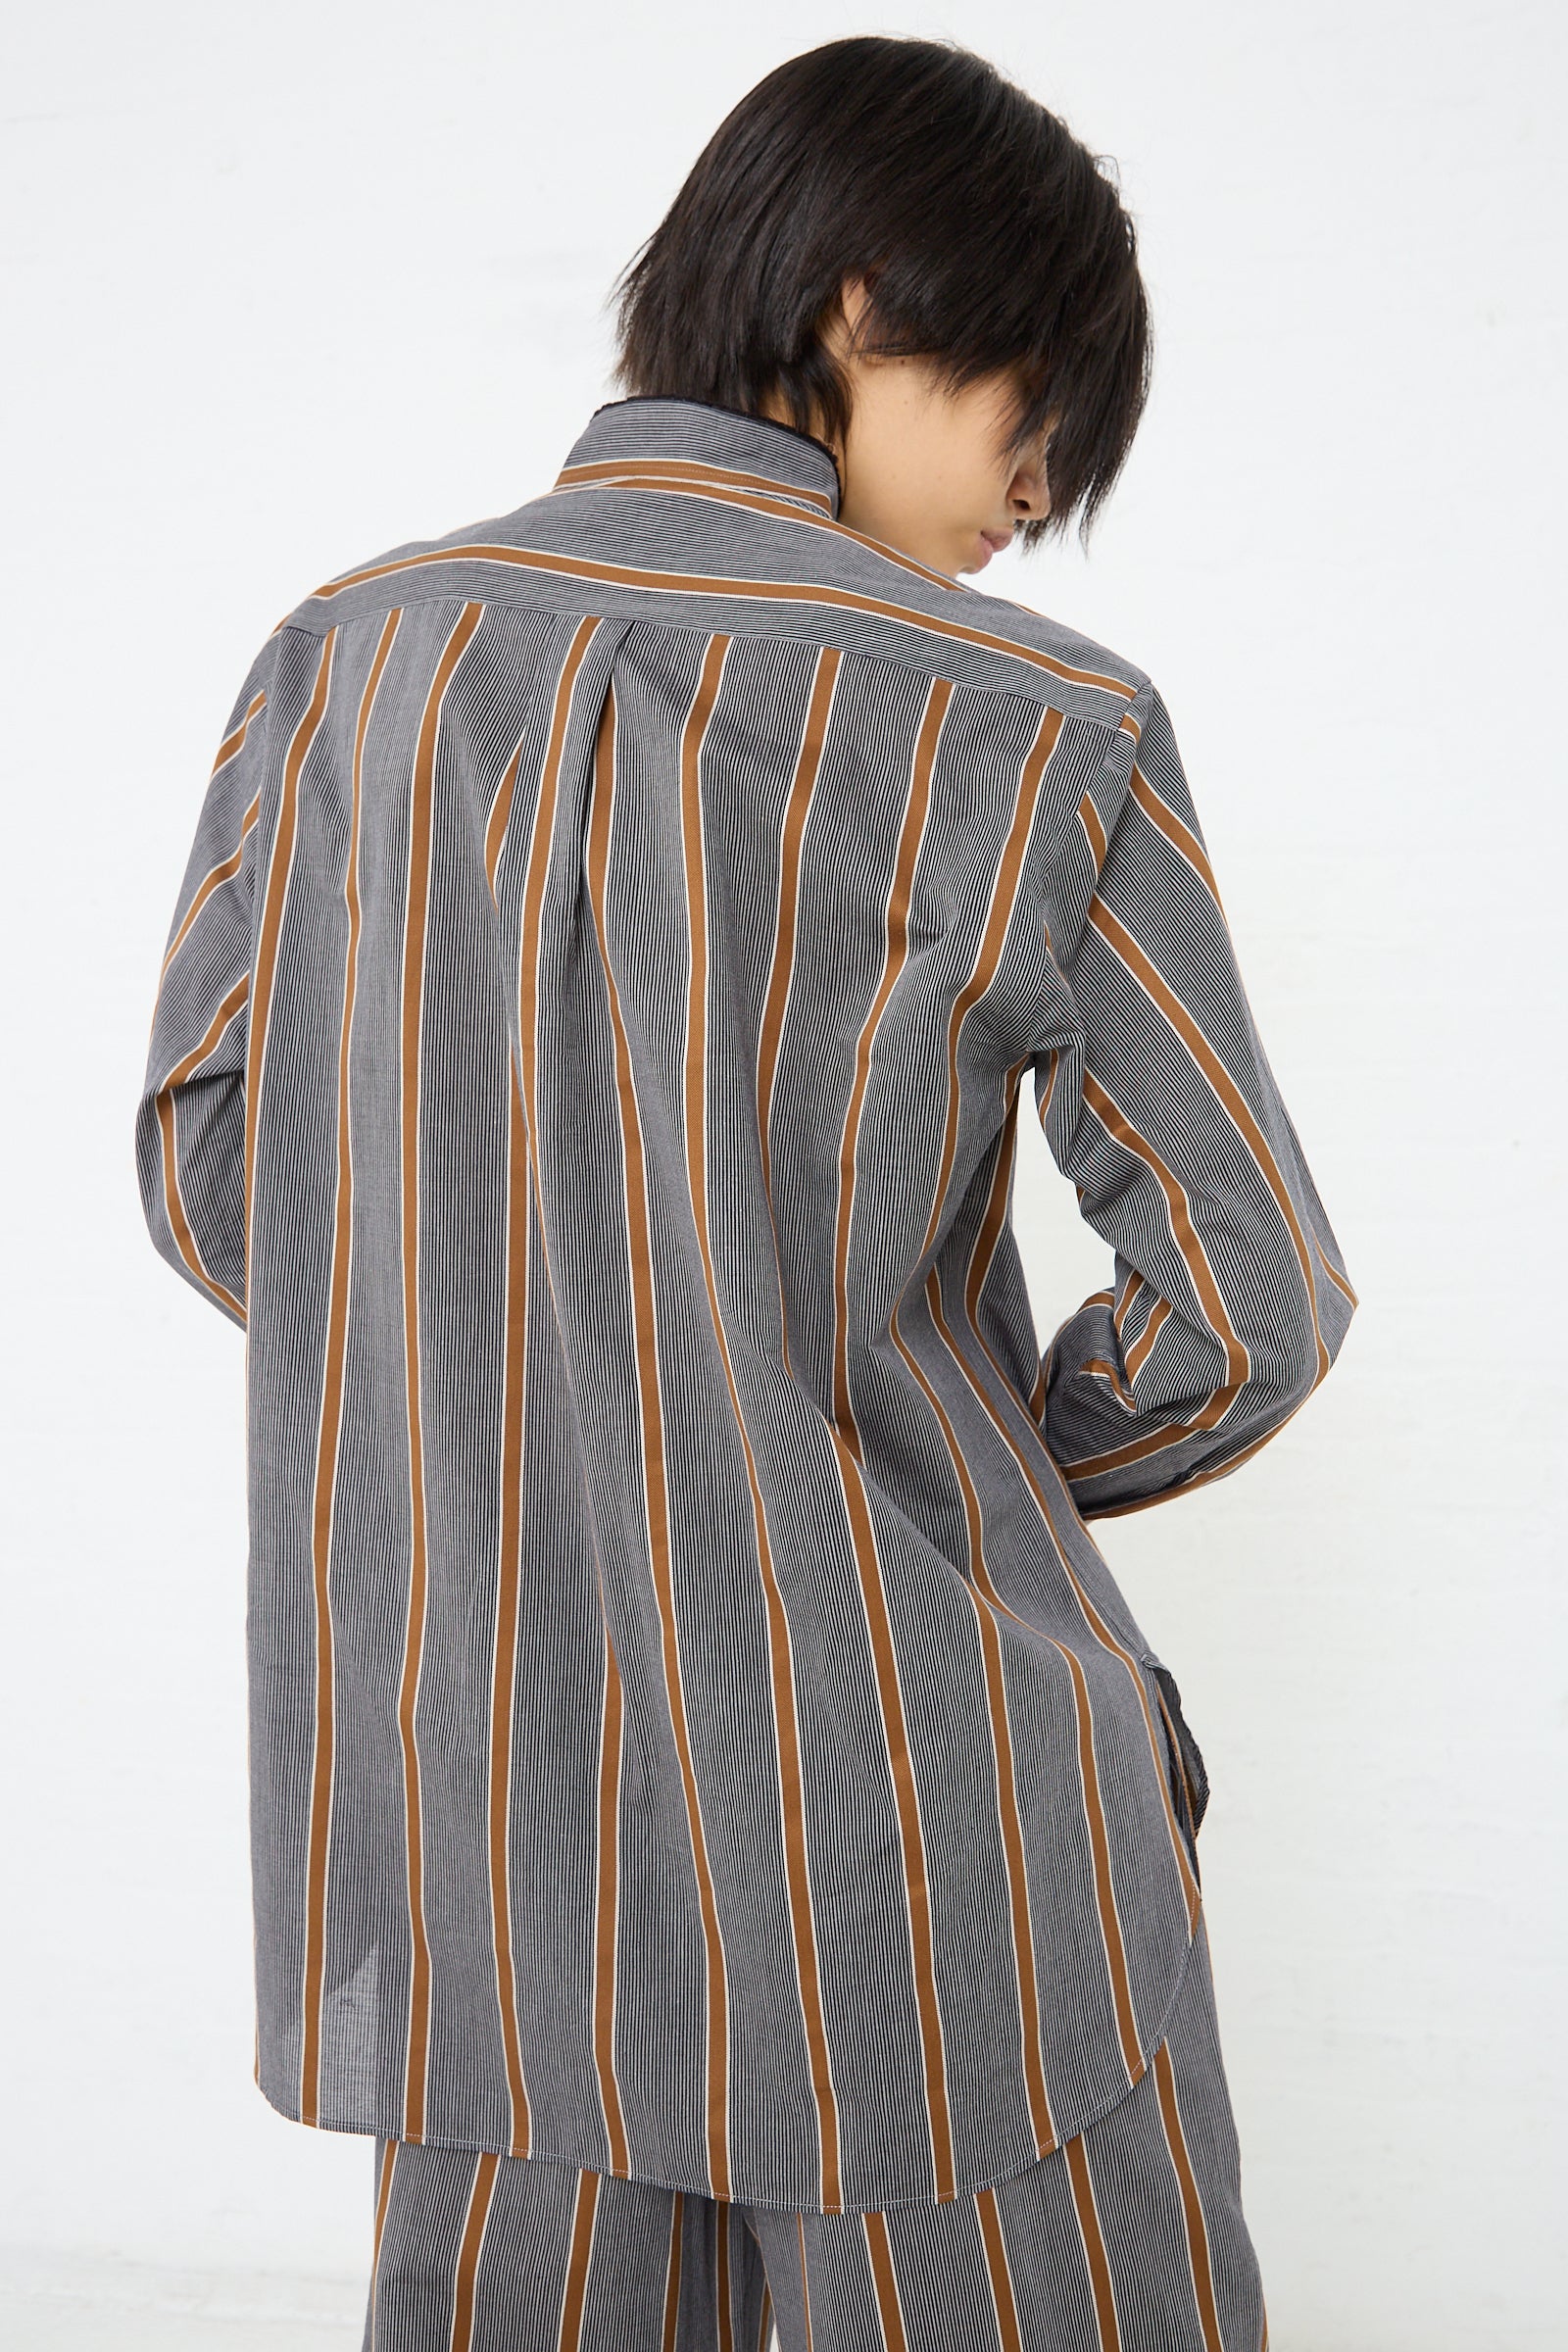 Mao Shirt with Fringed Collar in Striped Black and Noisette L